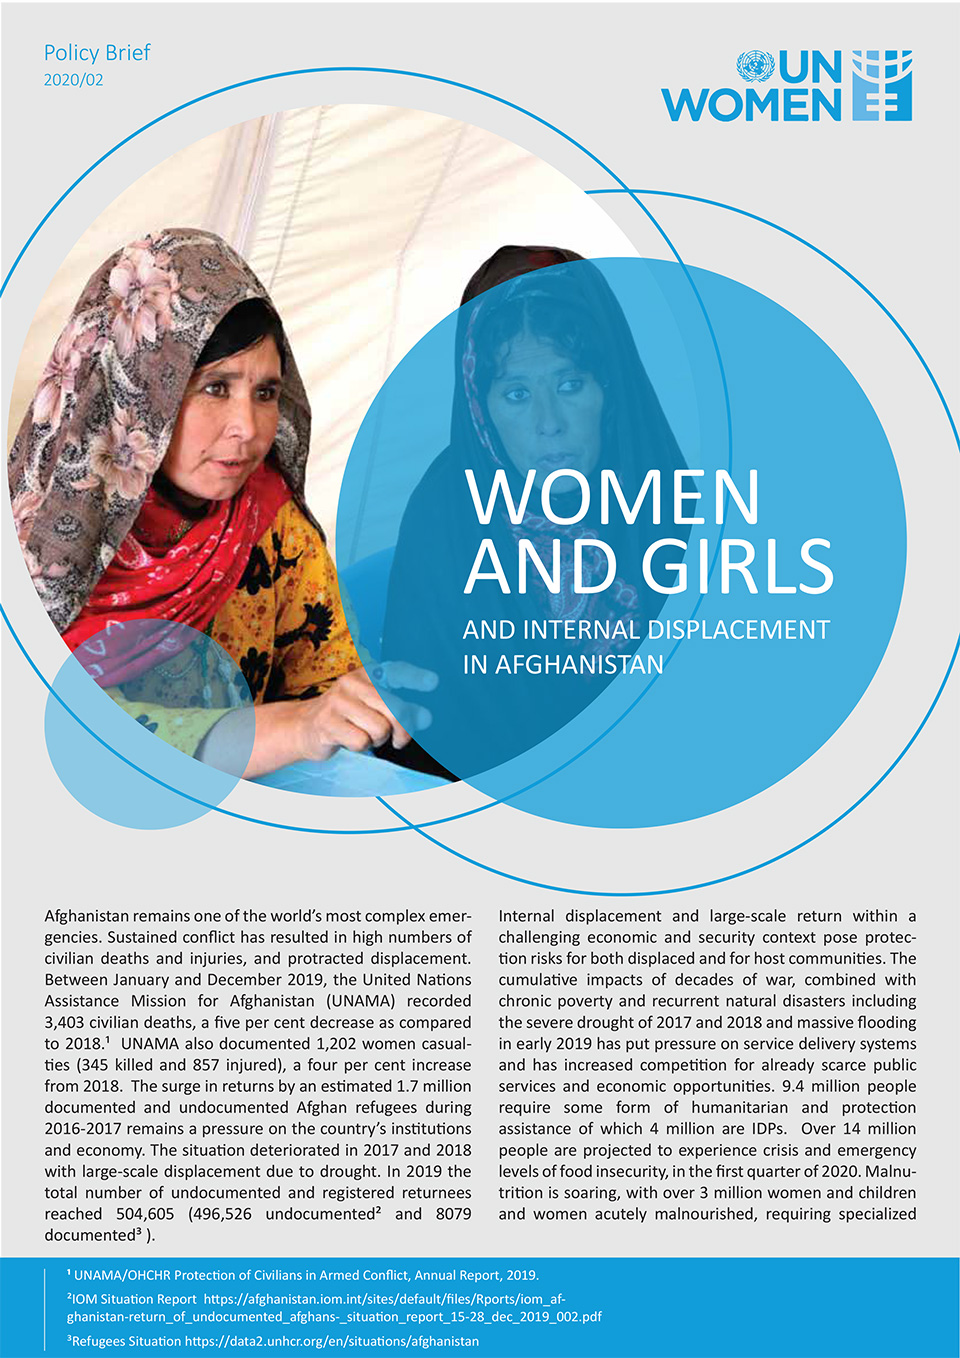 Policy Brief: Women and Girls and Internal Displacement in Afghanistan